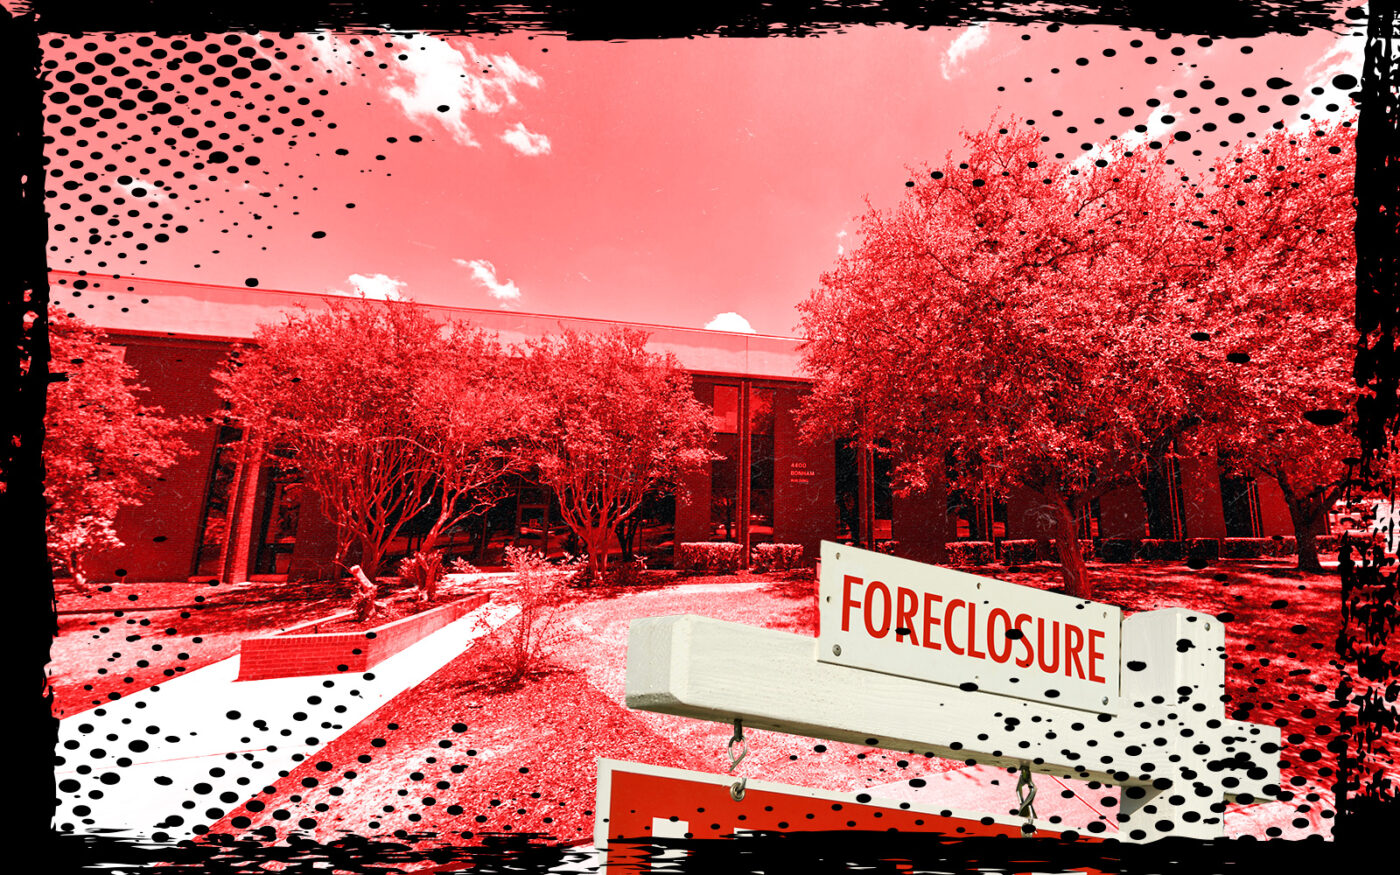 San Antonio Office Complex Sells for $31M in Foreclosure